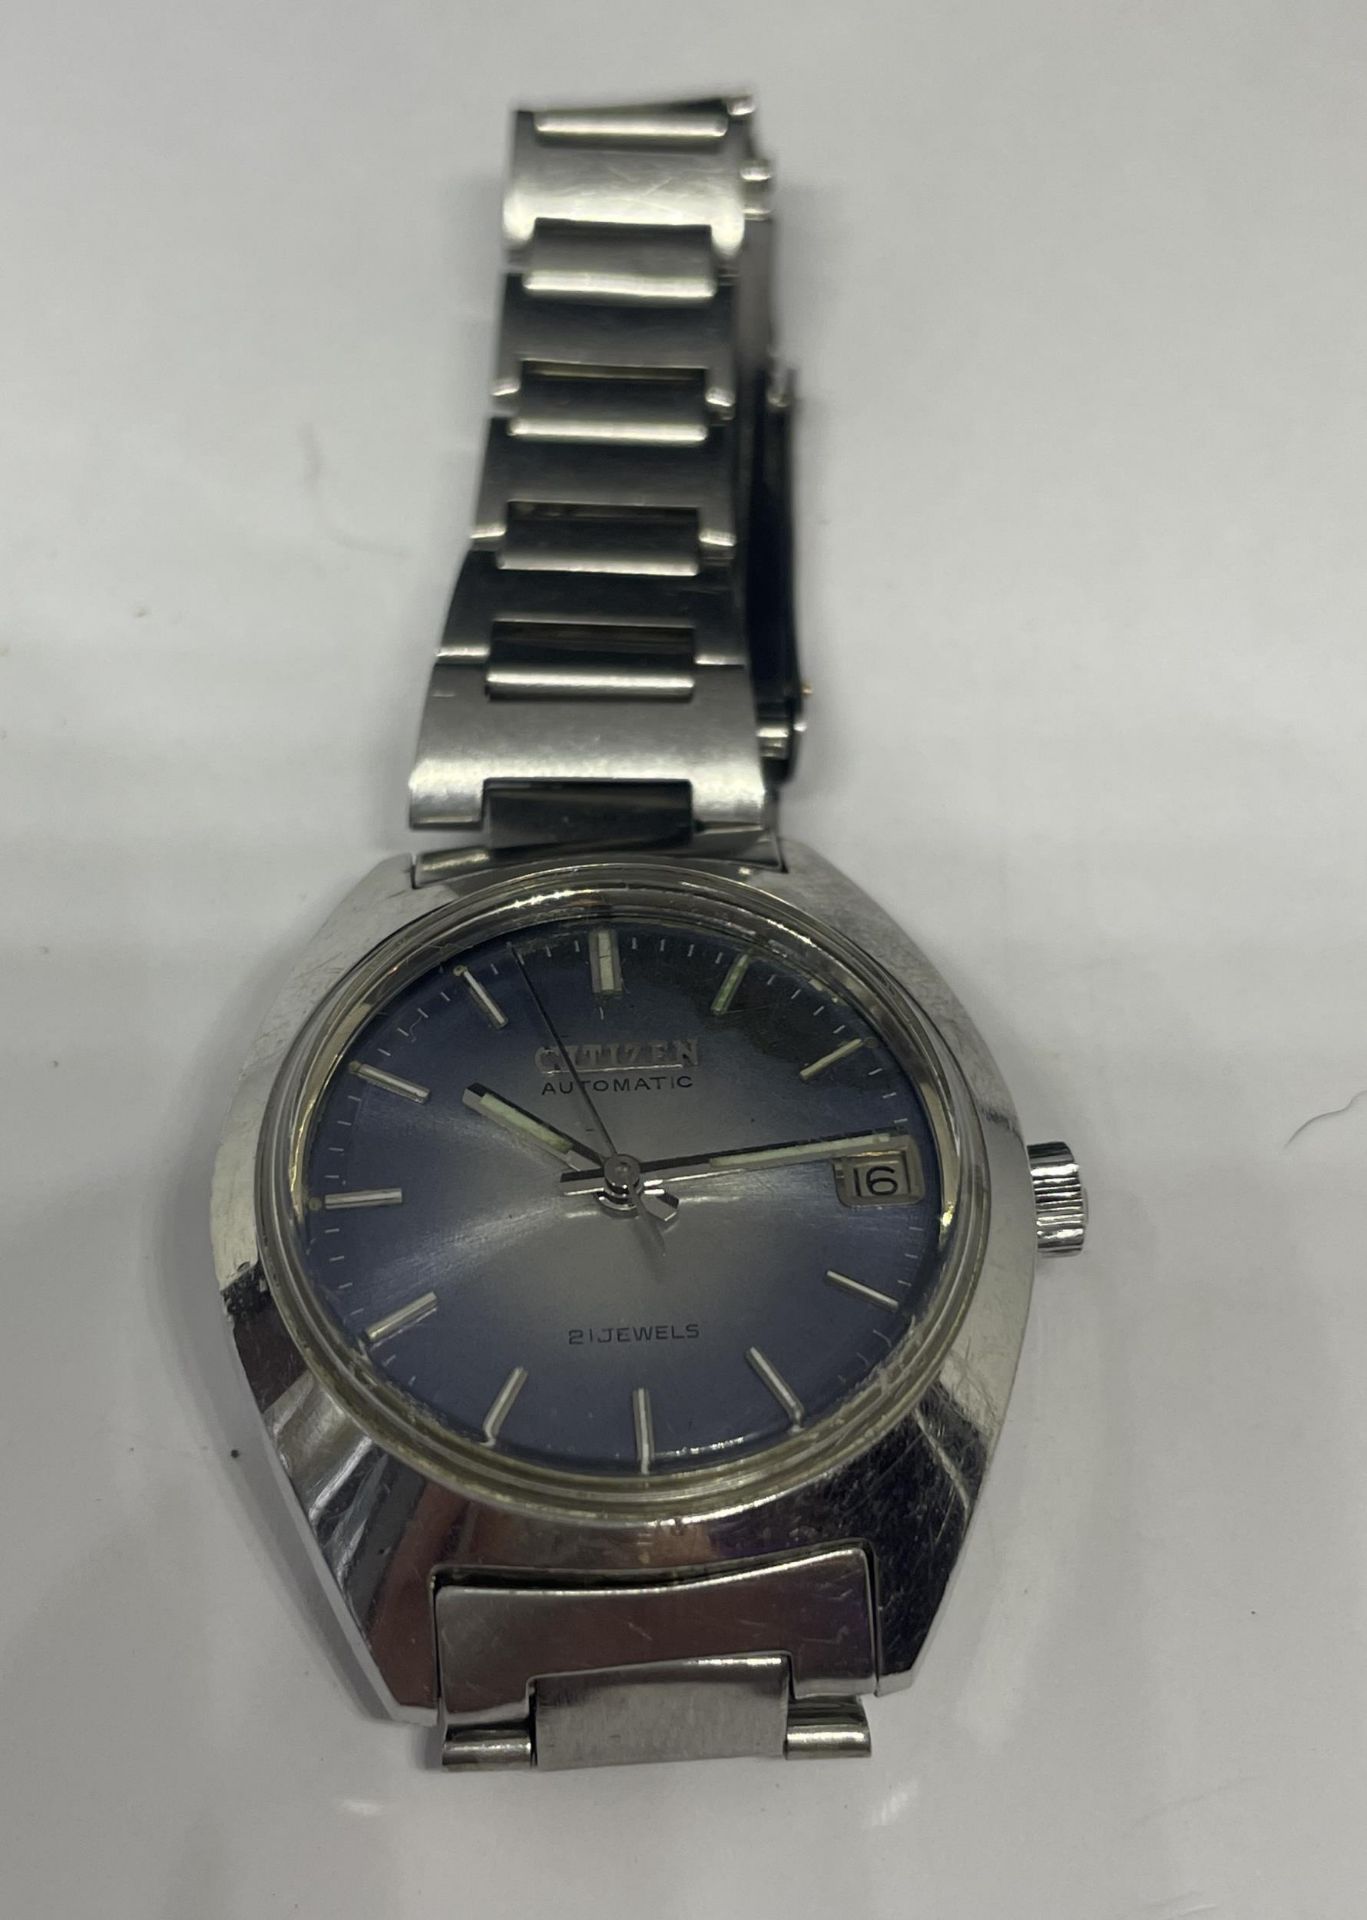 A VINTAGE CITIZEN AUTOMATIC WRIST WATCH WITH ORIGINAL STRAP, SEEN WORKING BUT NO WARRANTIES GIVEN